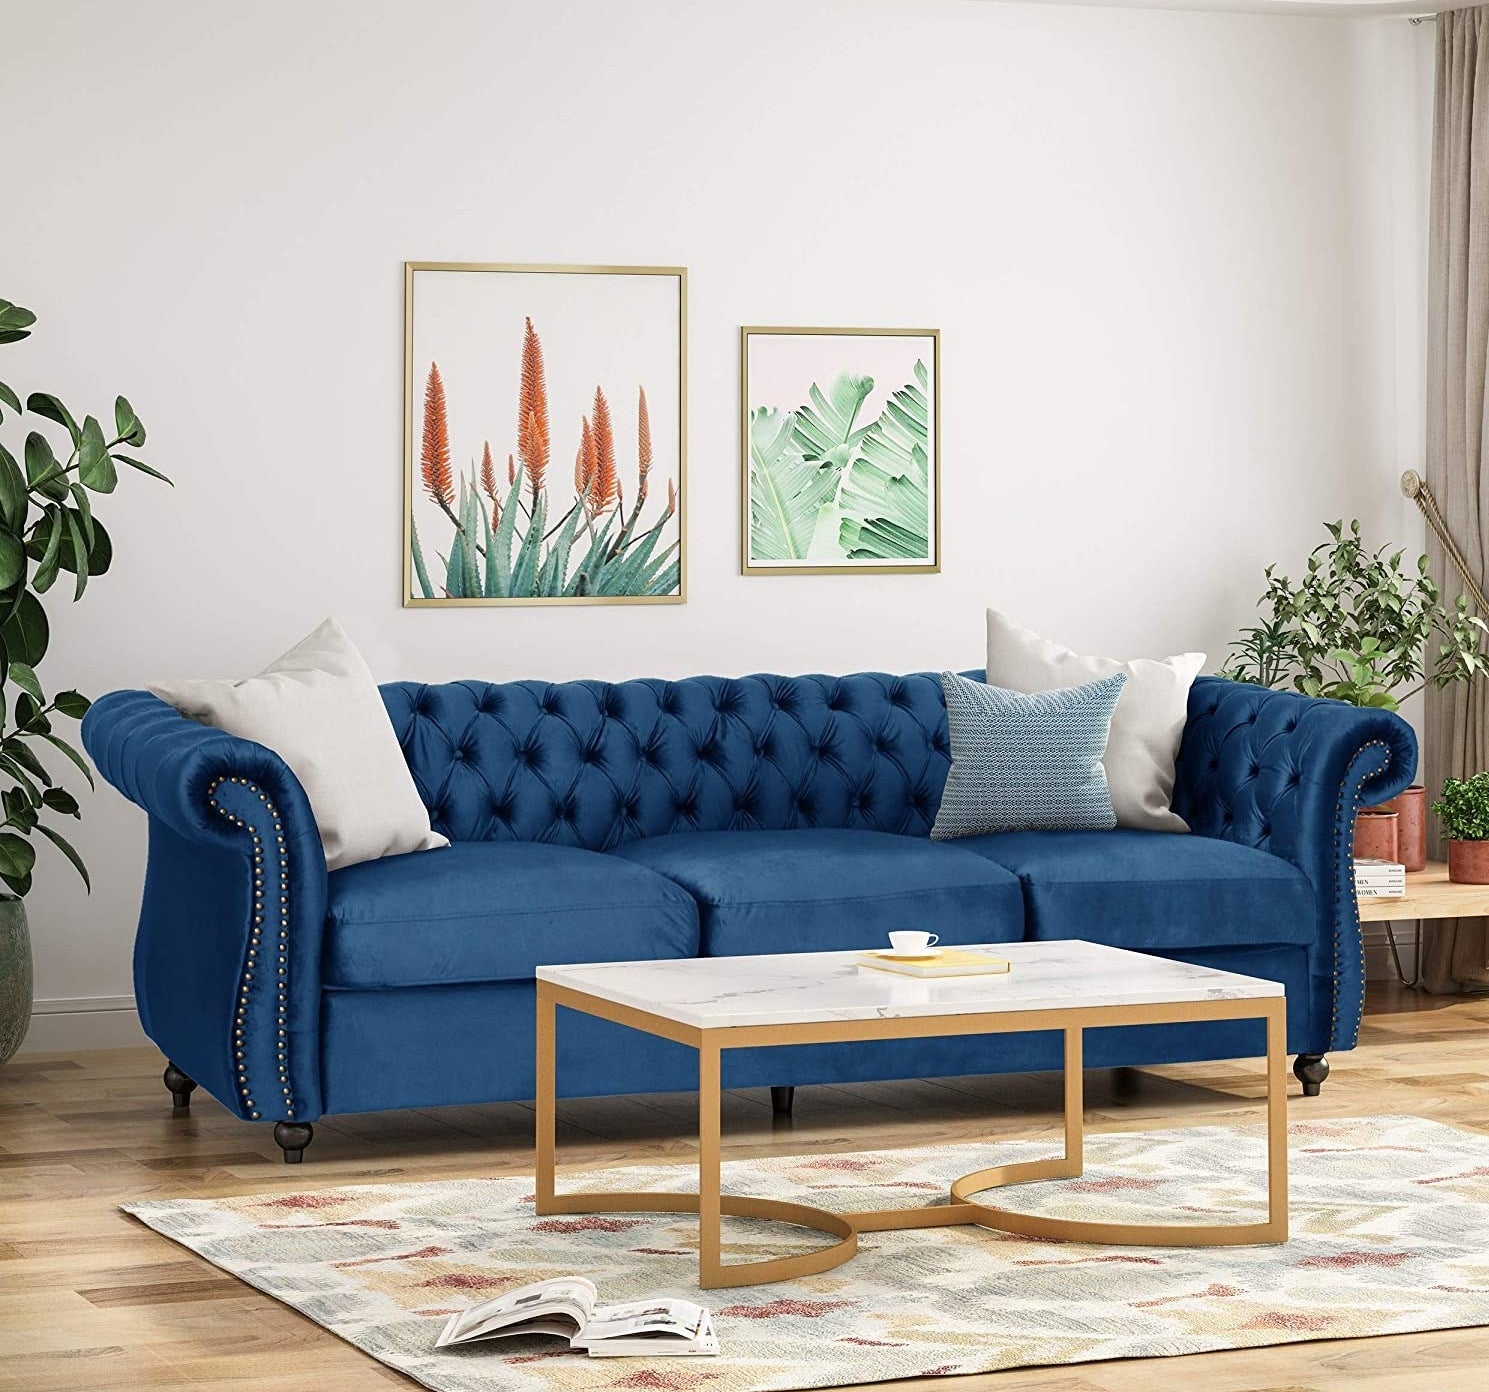 A blue couch with white and blue pillows